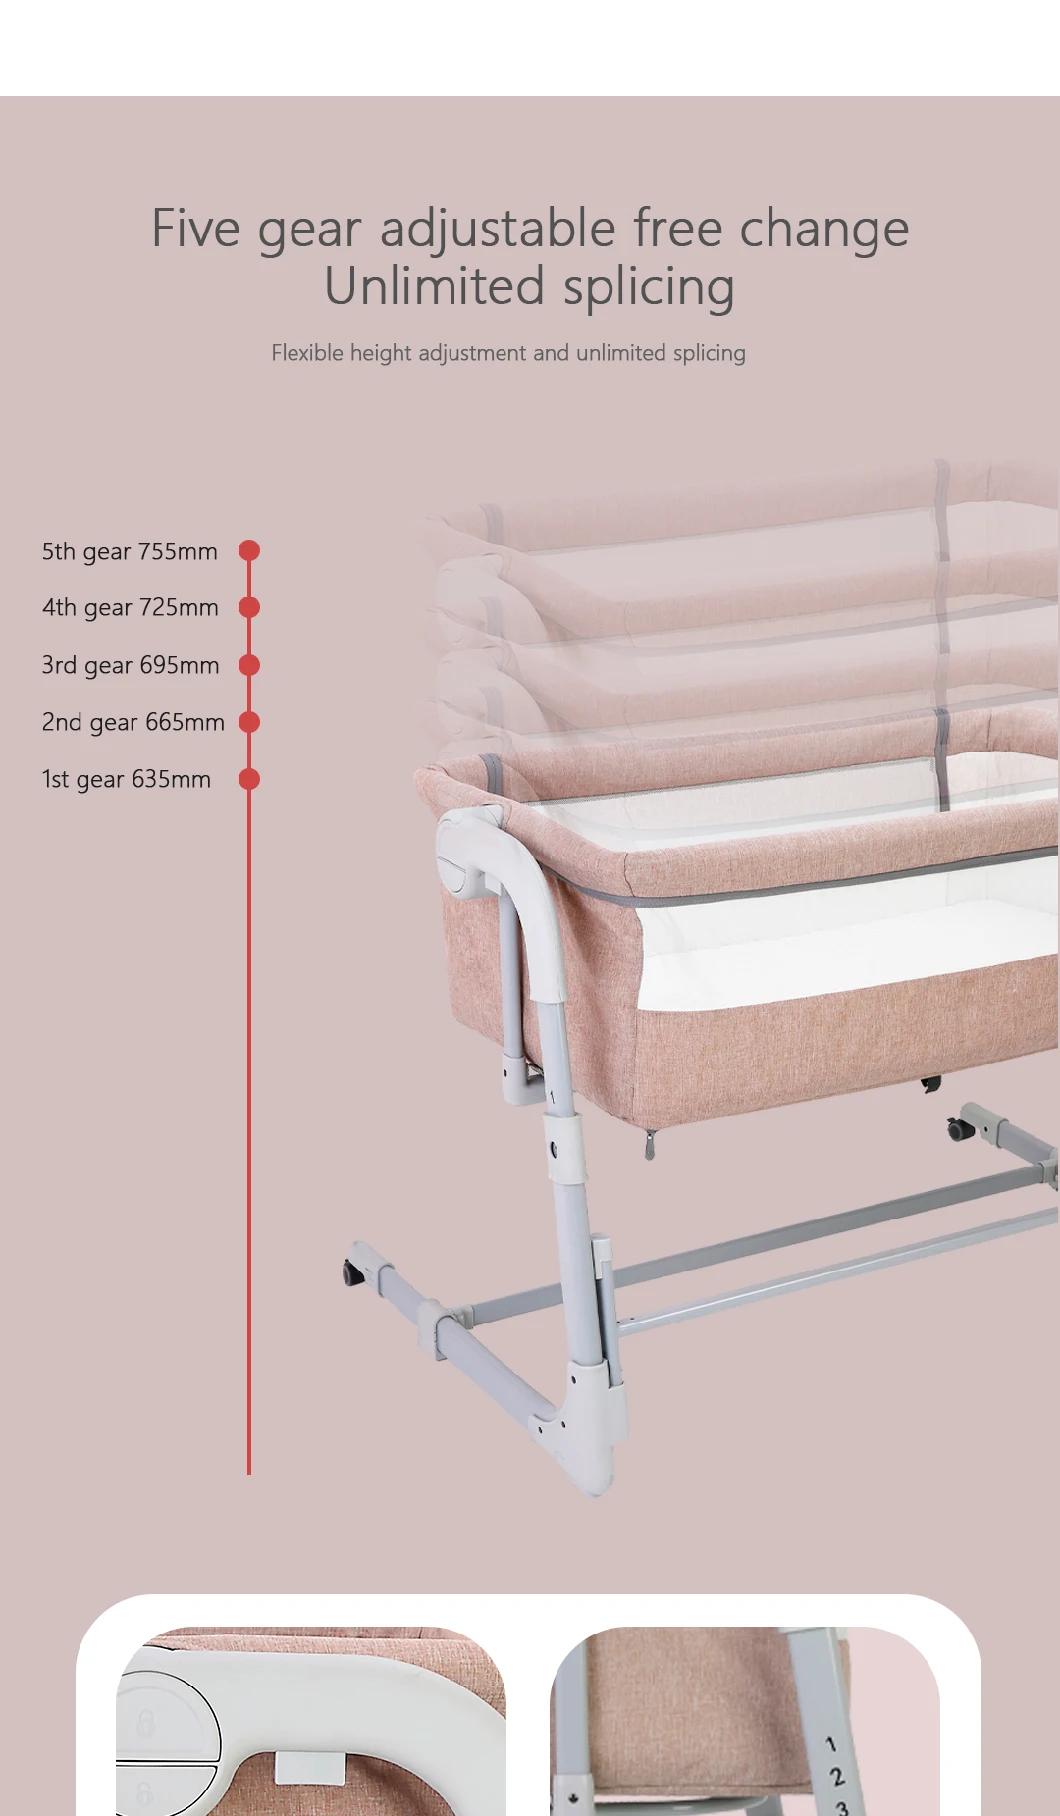 Modern Premium Quality Portable Folding Baby Bed in Competitive Price